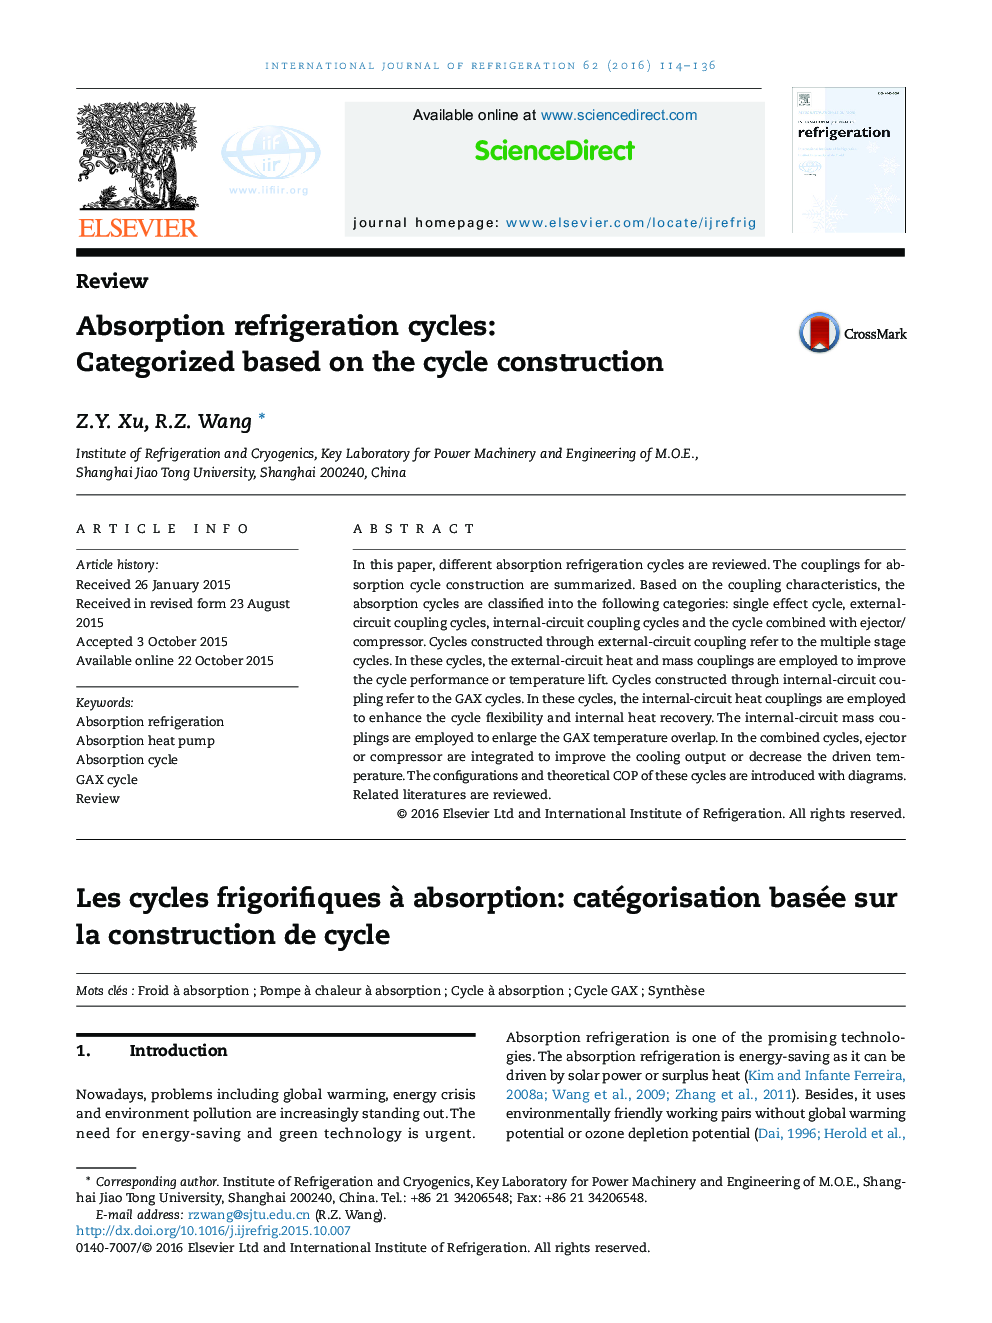 Absorption refrigeration cycles: Categorized based on the cycle construction